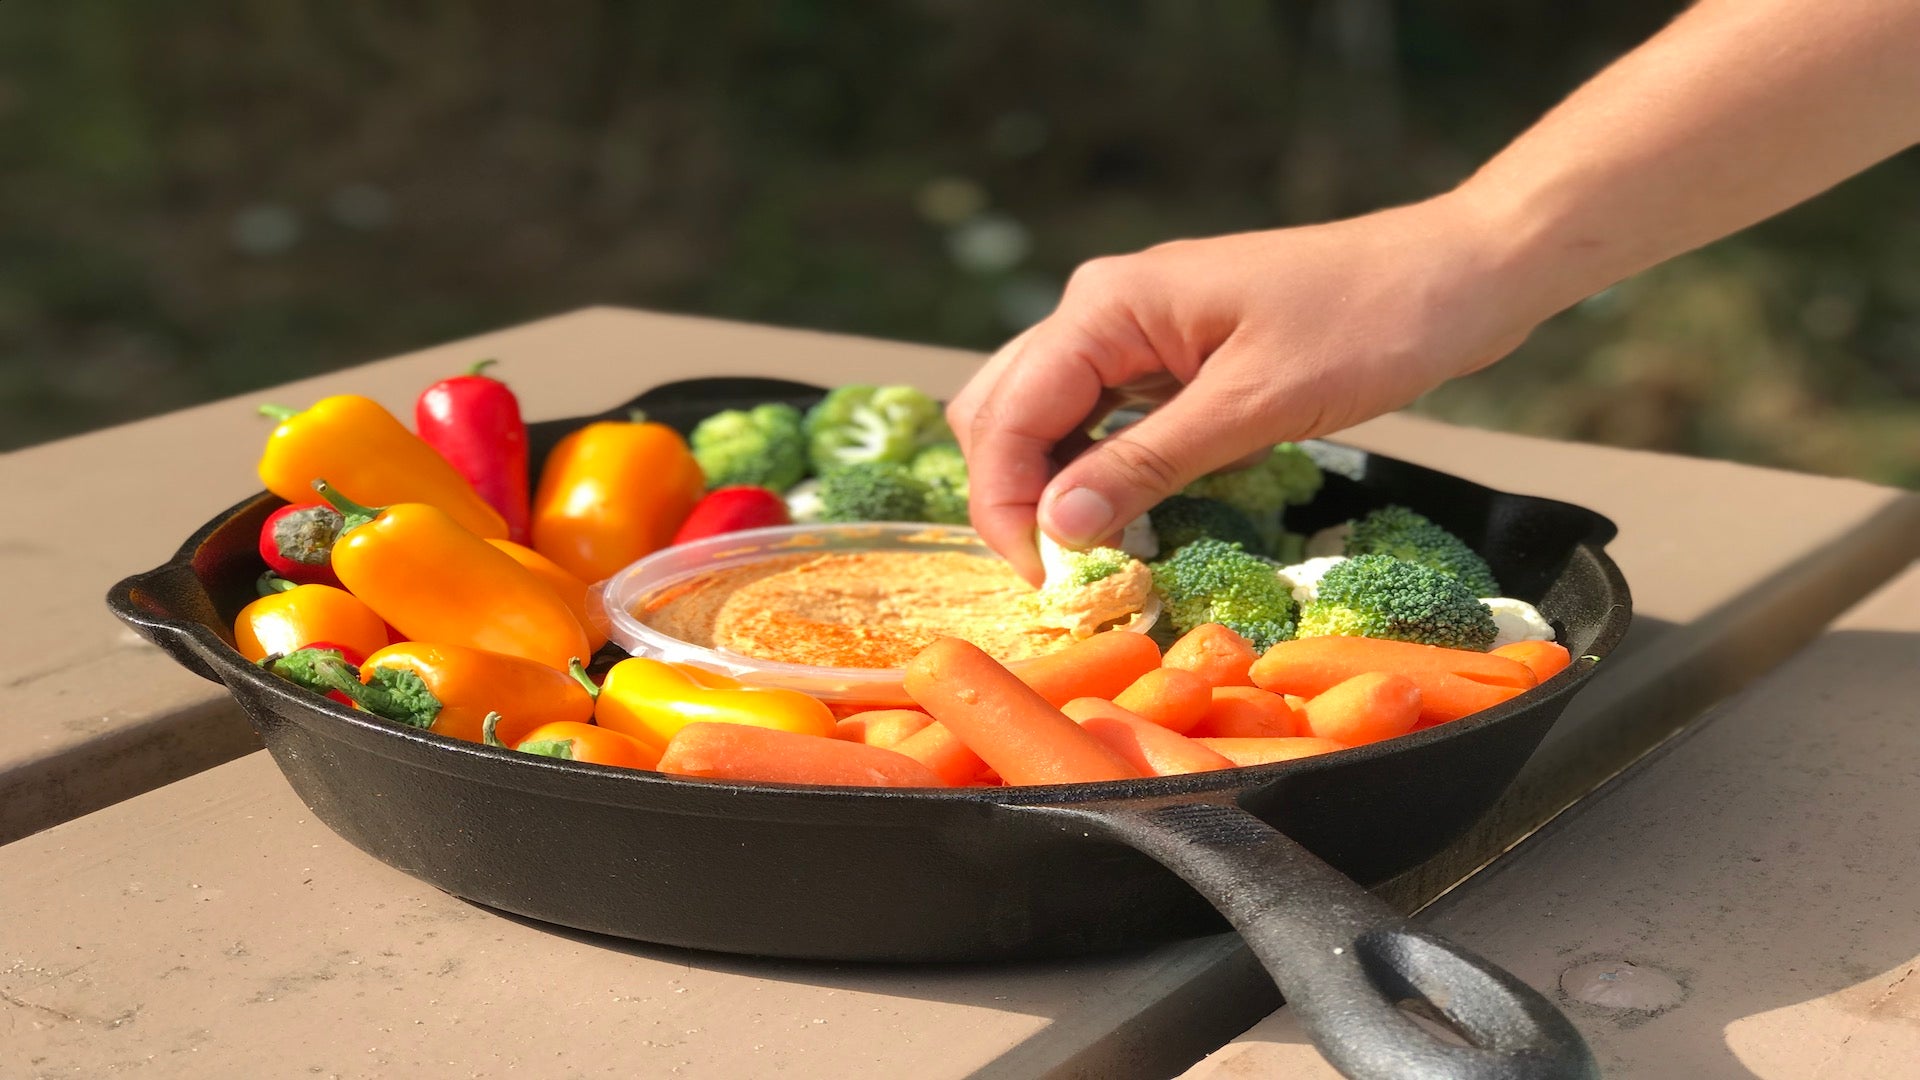 10 Items to Add to Your Camping Food List